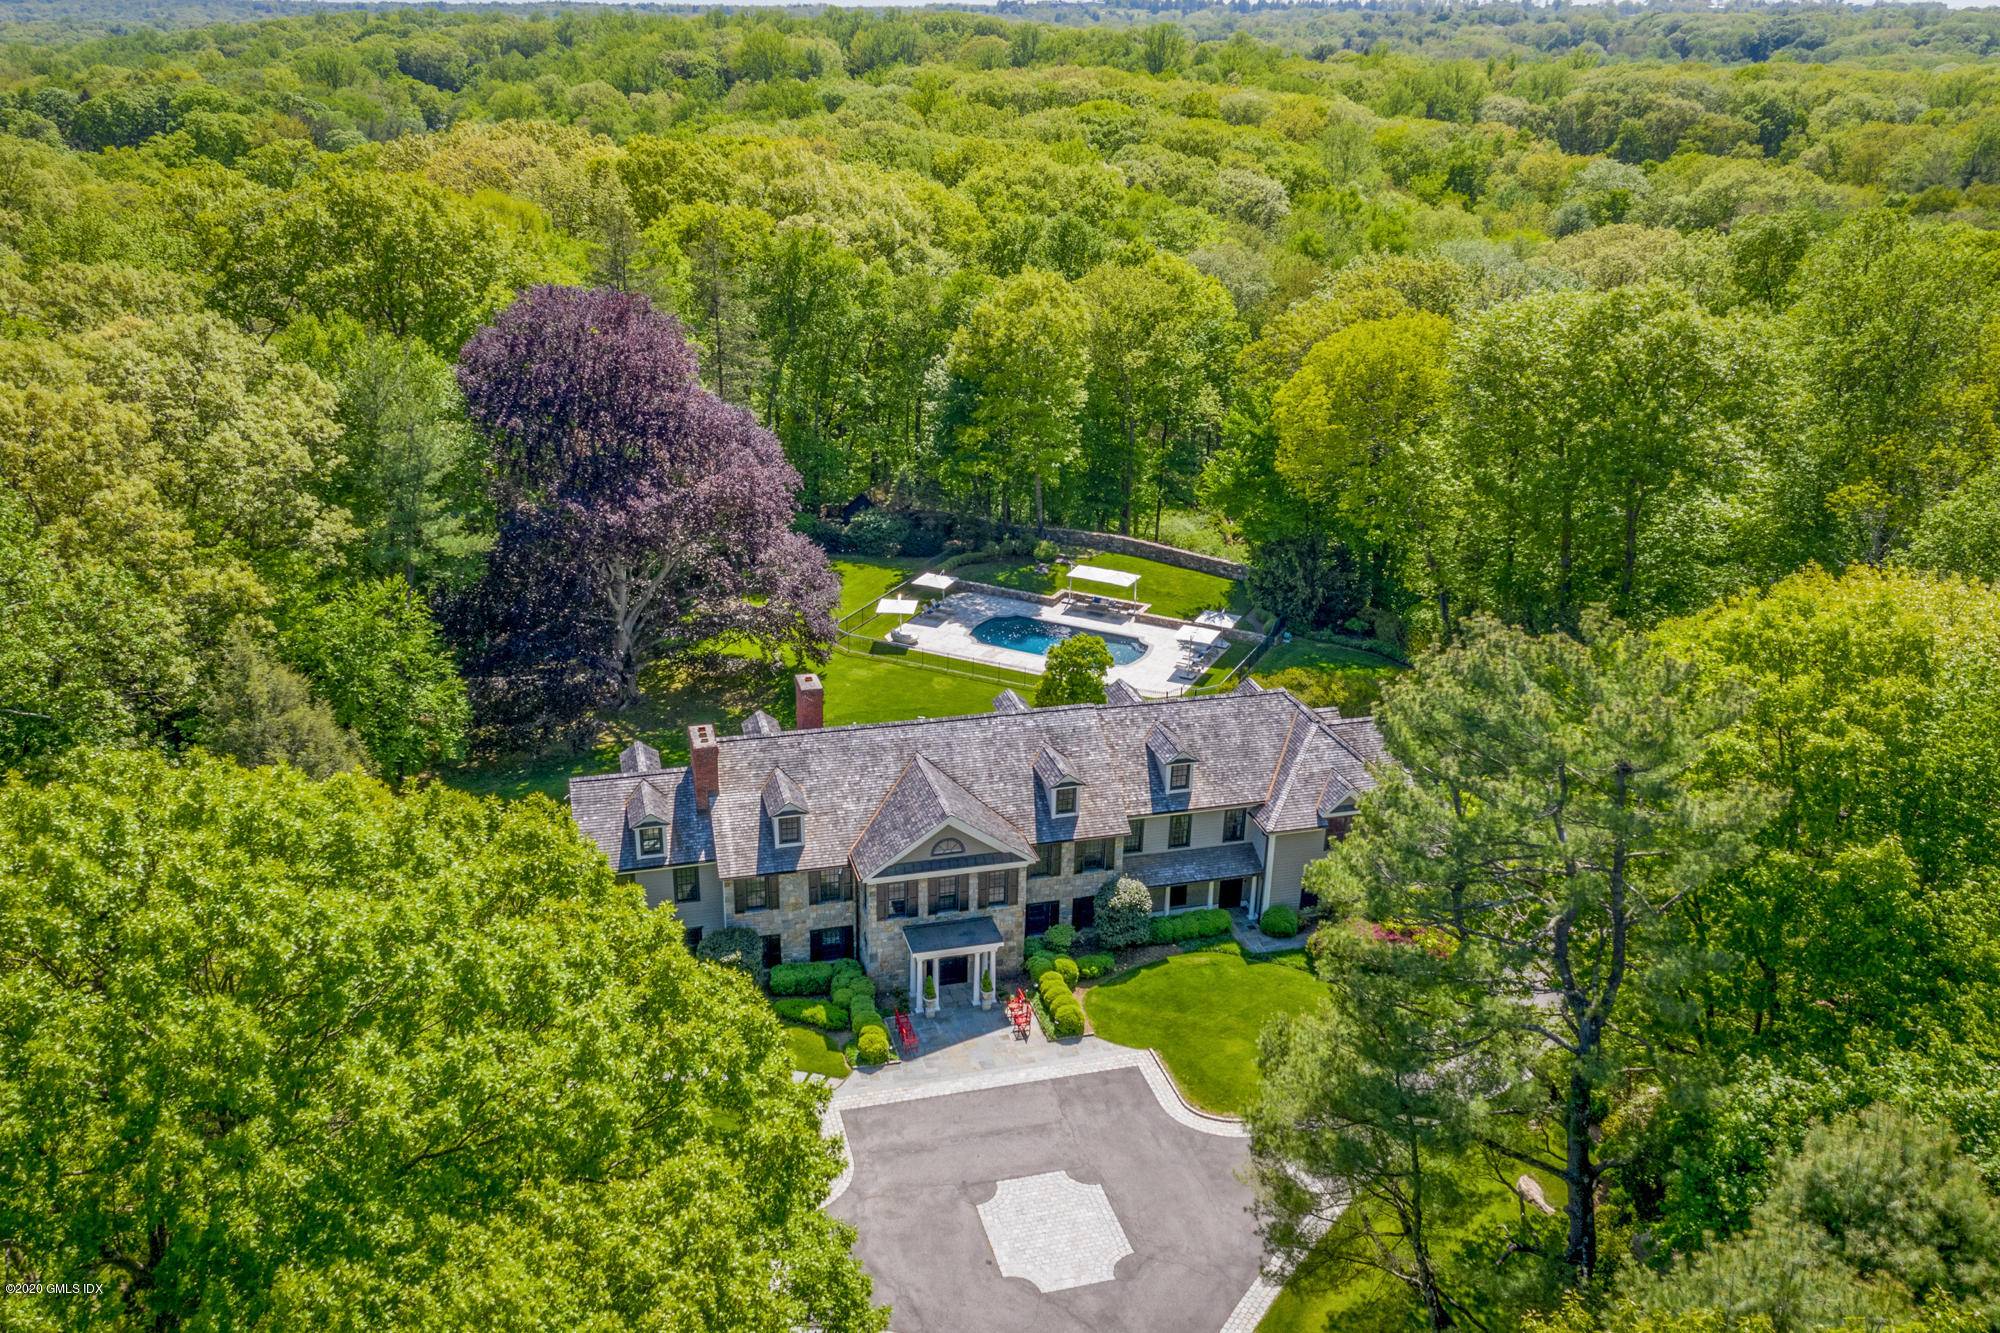 Four beautiful acres with lush sweeping lawn surround this majestic Georgian Colonial available for purchase fully furnished.